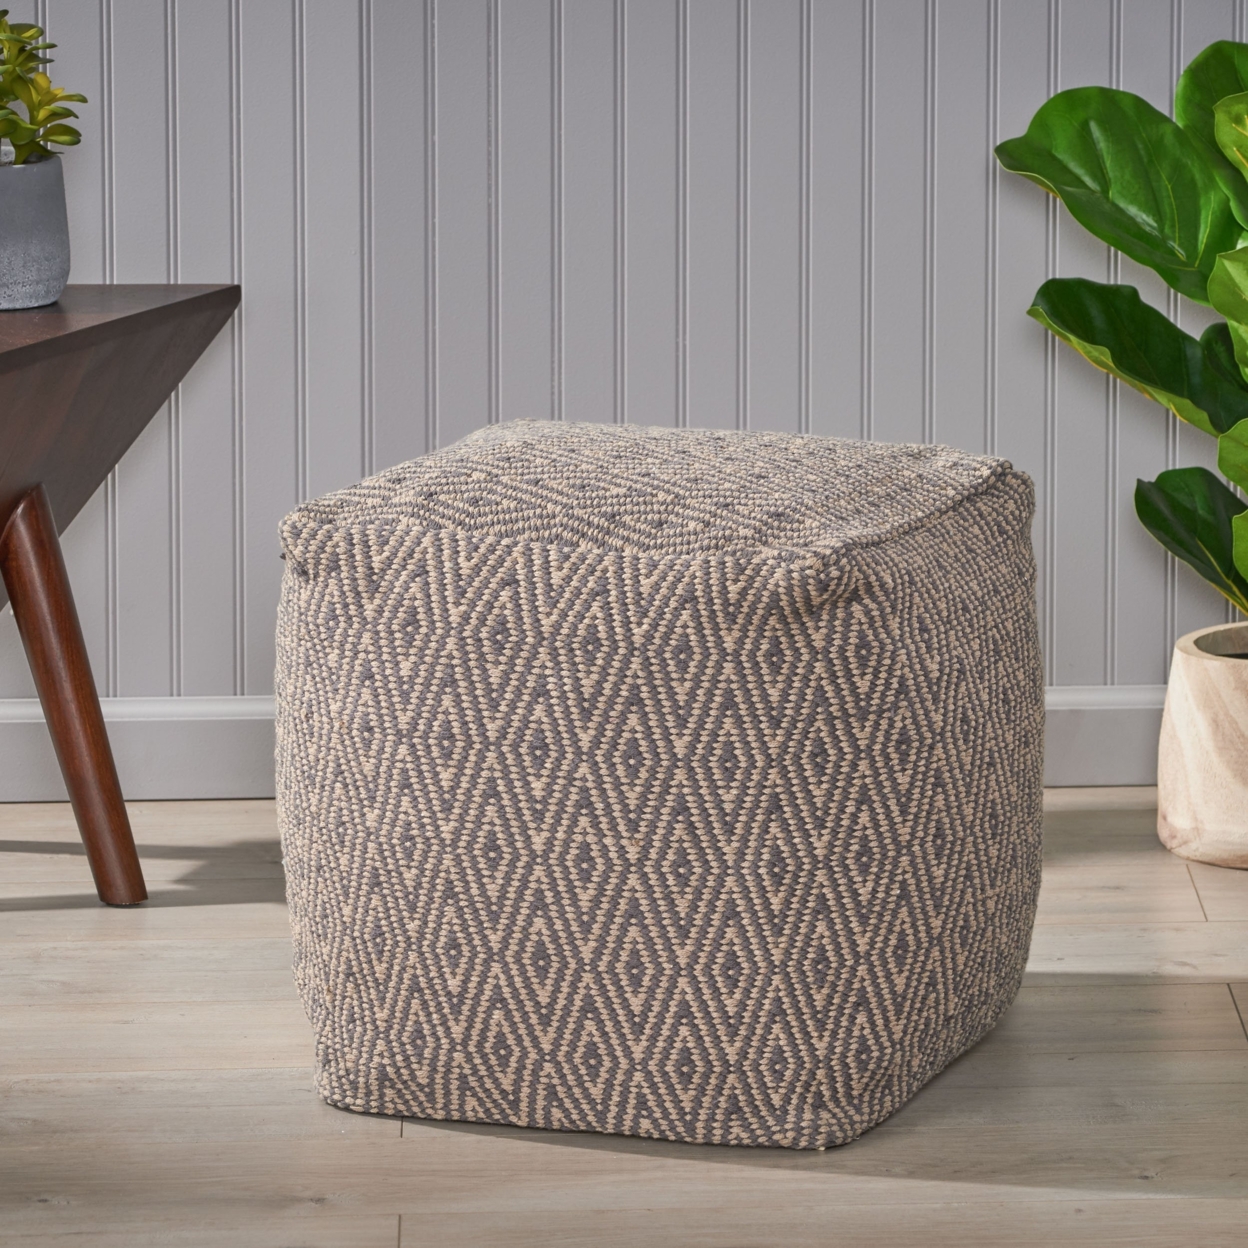 Sovereign Hand-Crafted Cotton Cube Pouf - Dark Gray/brown